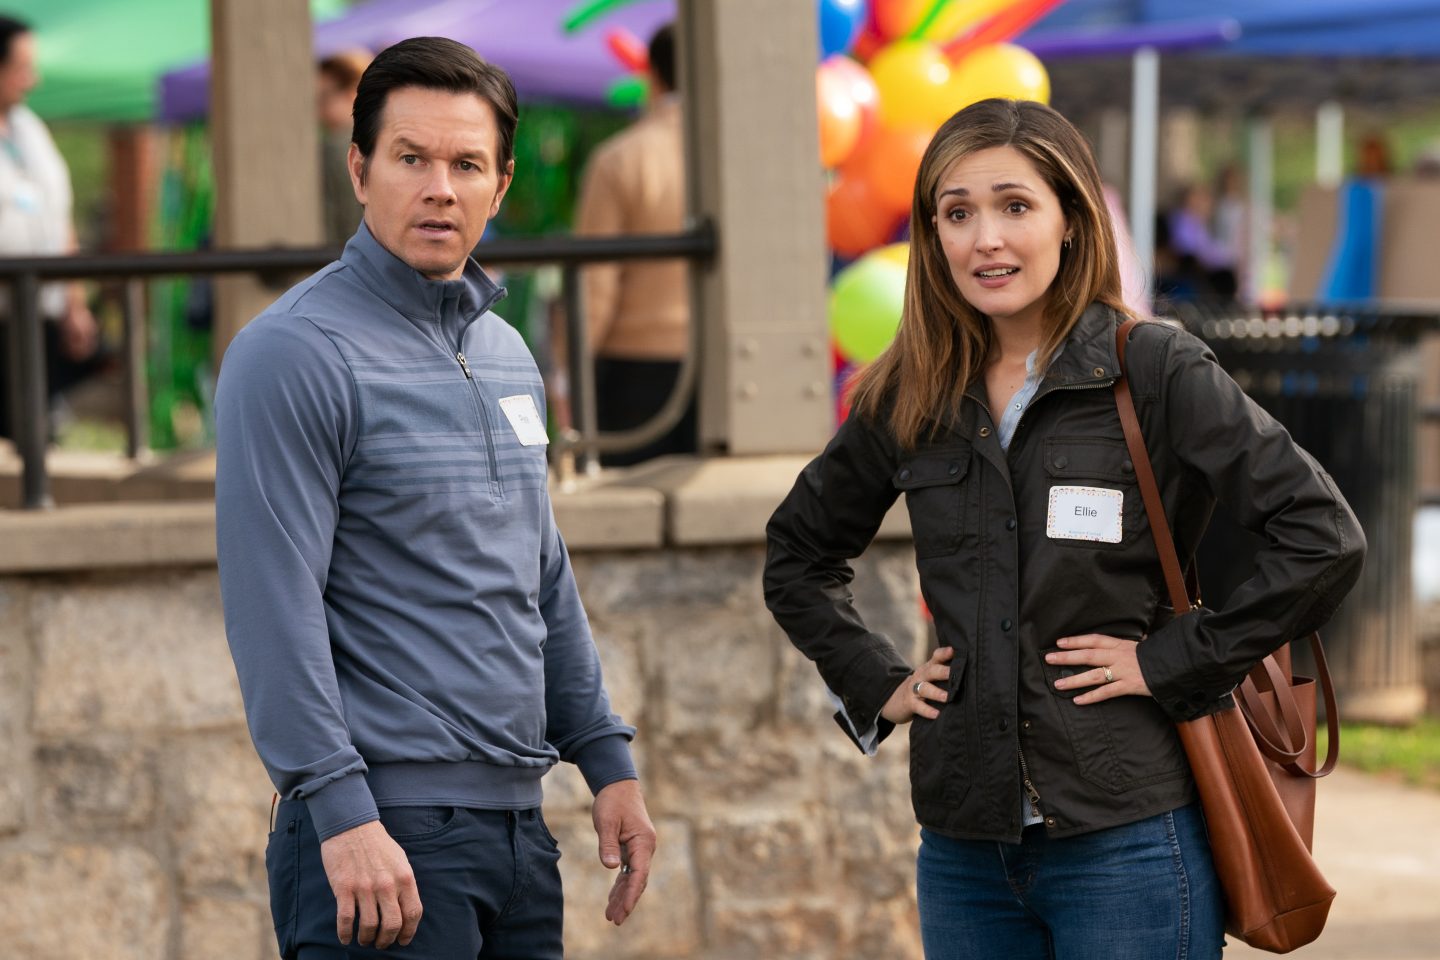 Instant Family still (Paramount Pictures)